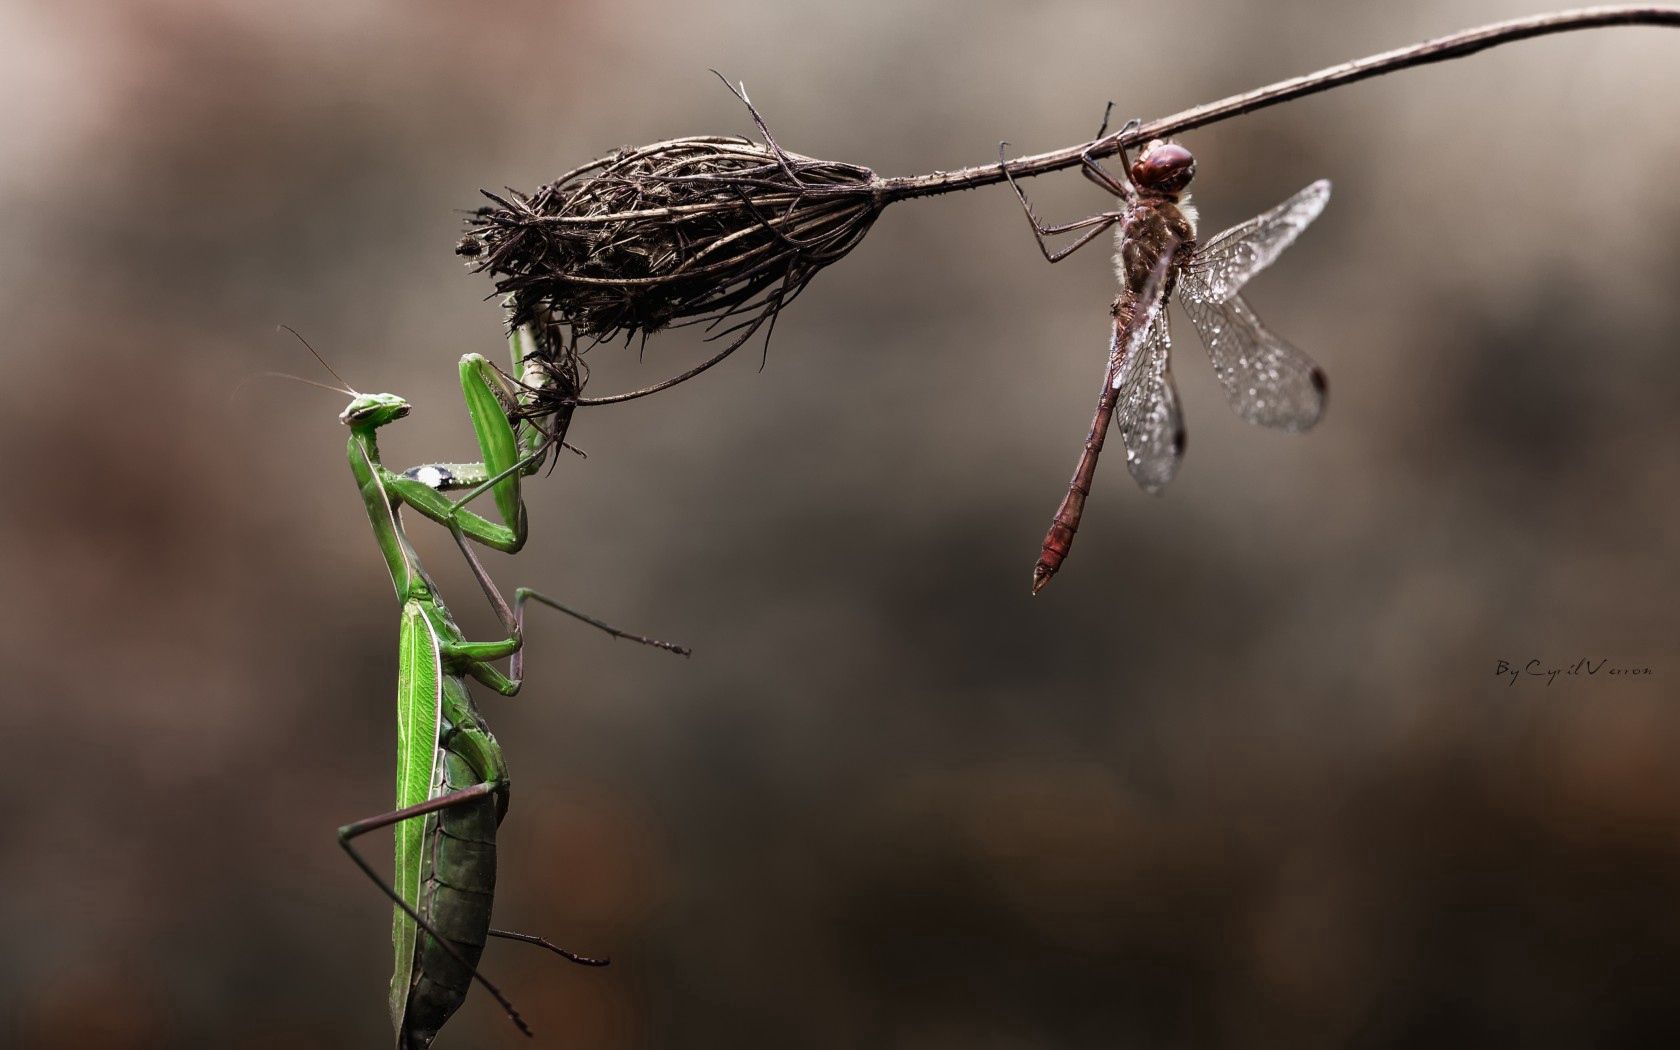 animals, insects, flower, macro, mantis, dry, blade of grass, blade, dragonfly, danger